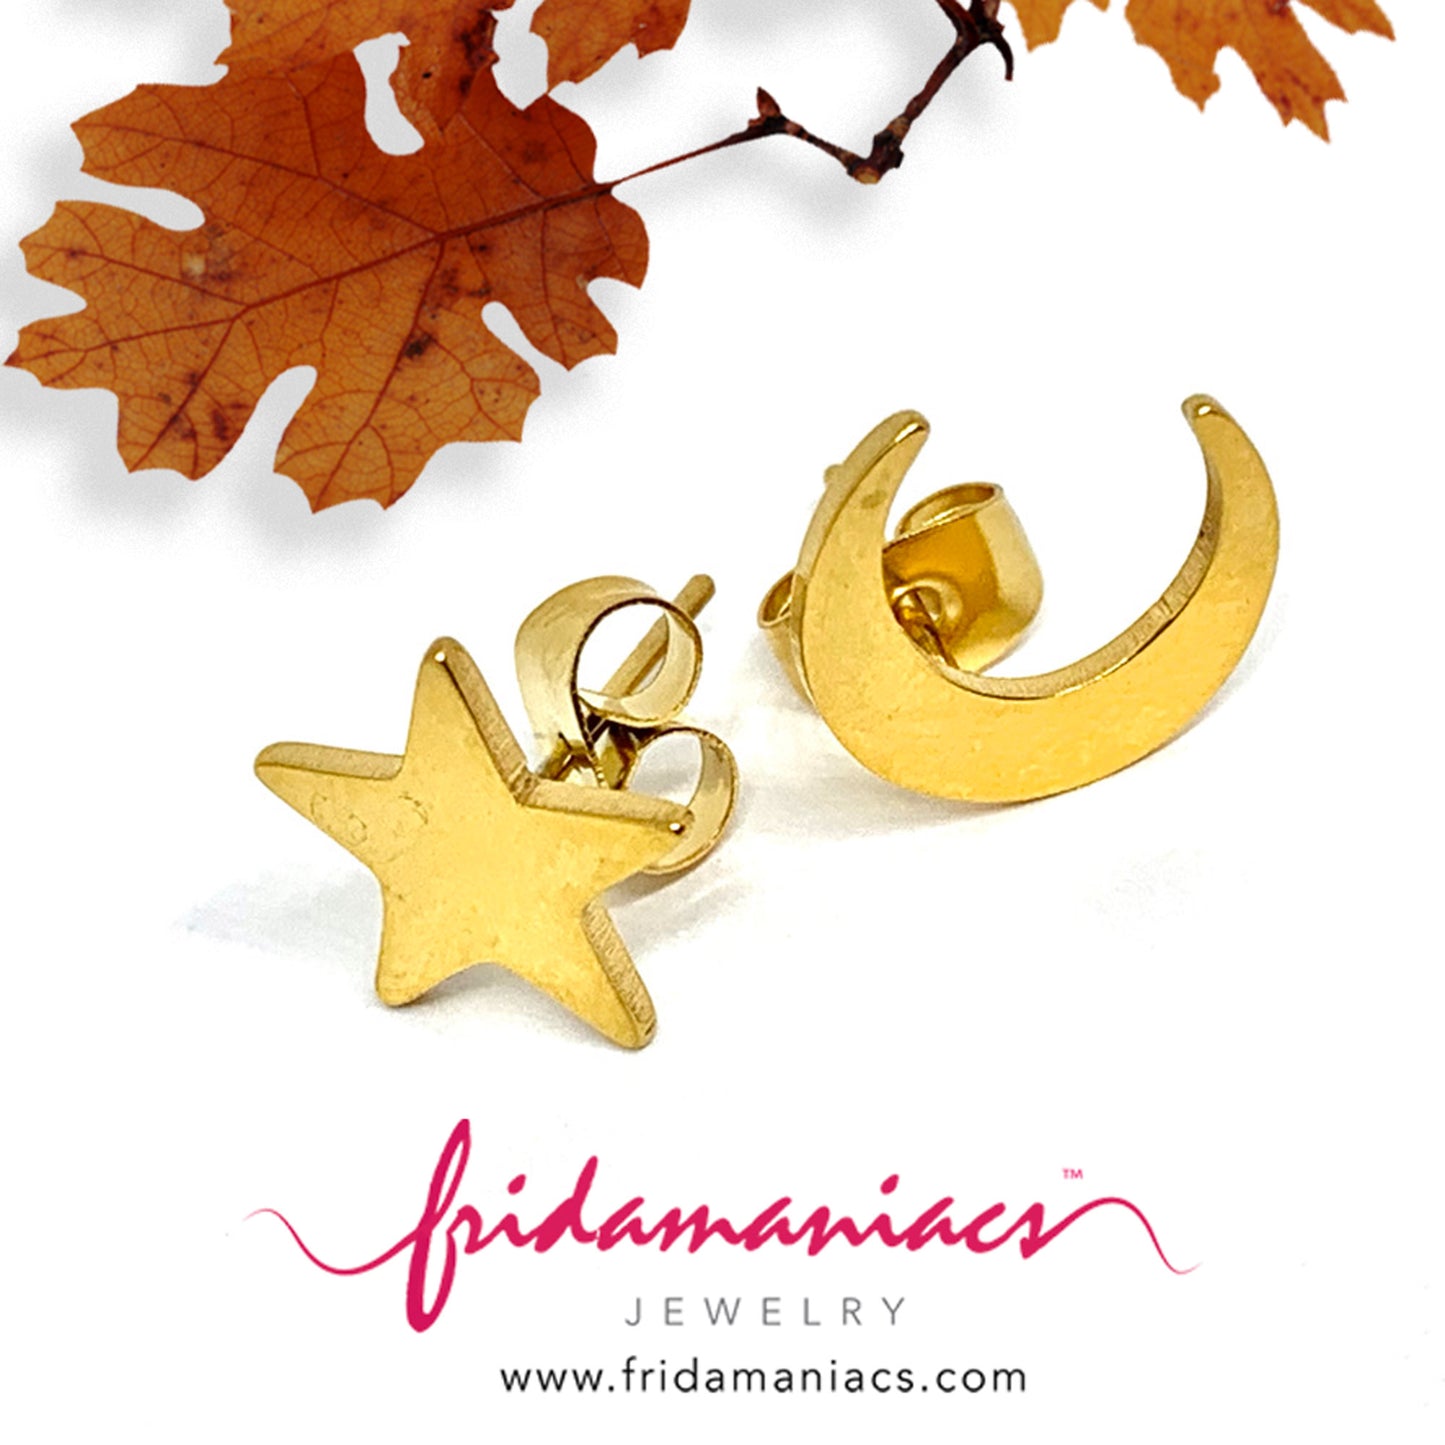 Moon and star gold stud earrings for women and girls. Mexican jewelry inspired by Frida Kahlo. Celestial jewelry. Luna y estrella aretes by fridamaniacs